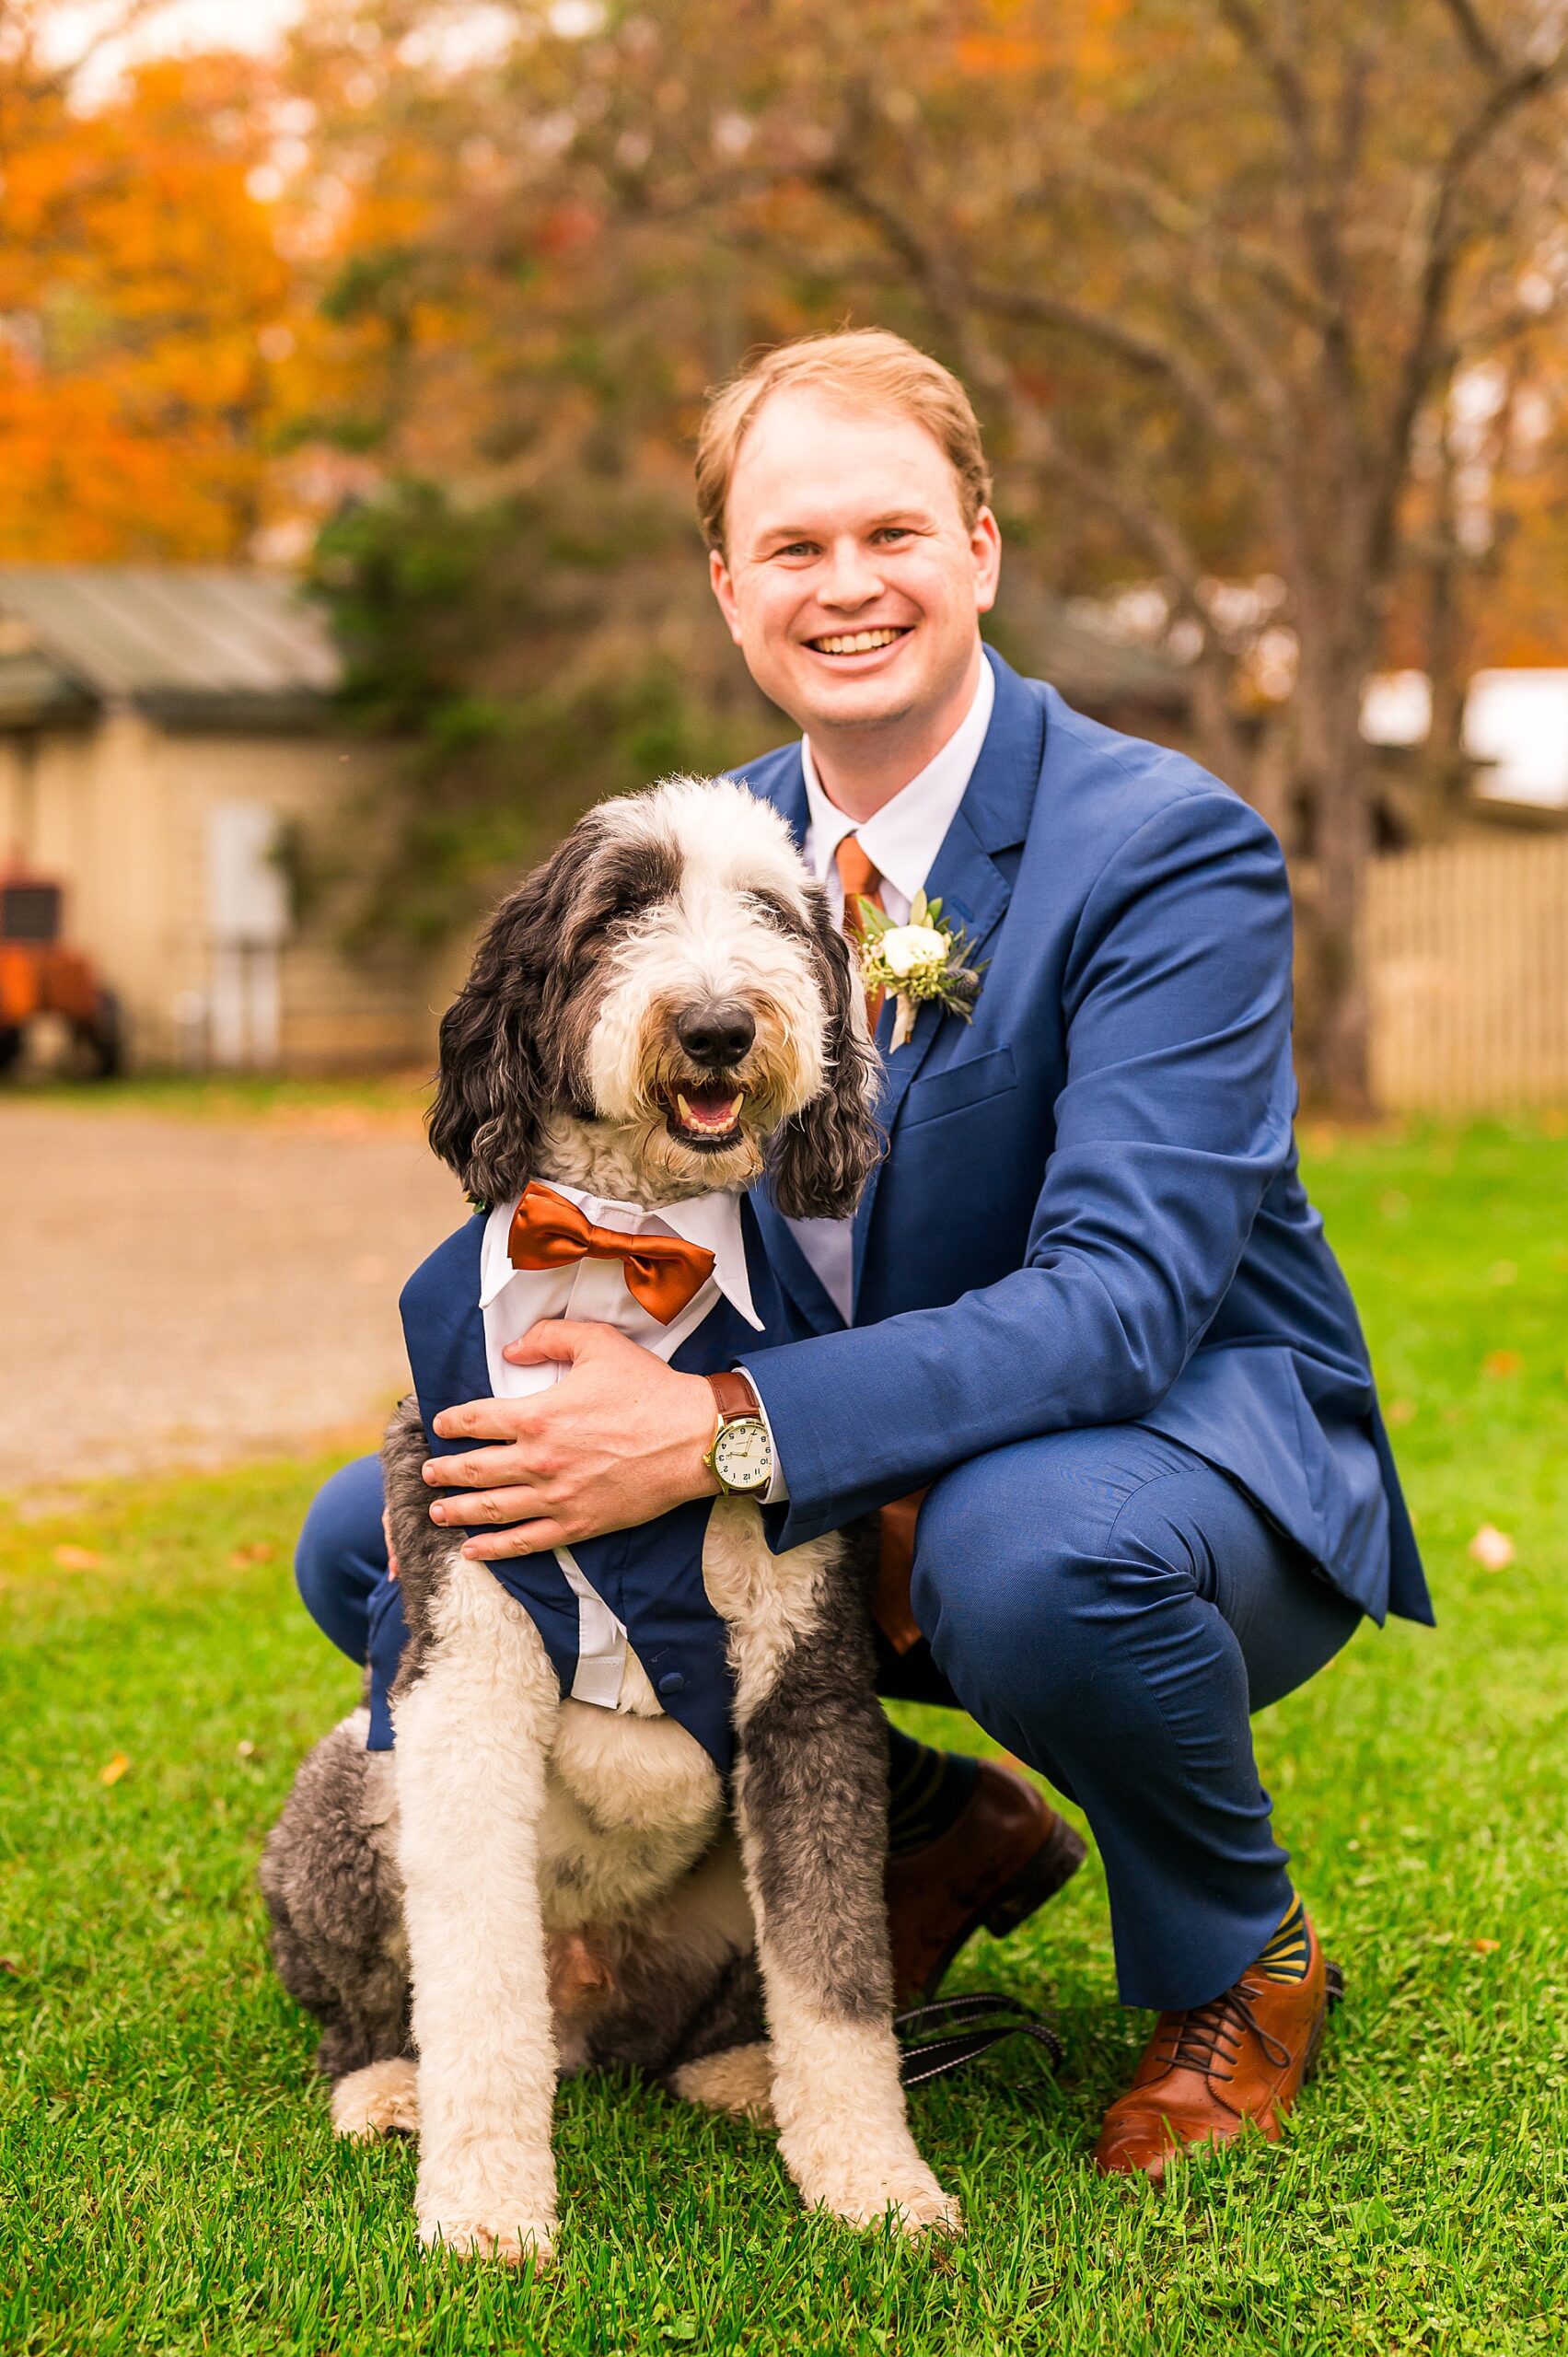 groom with dog in tux